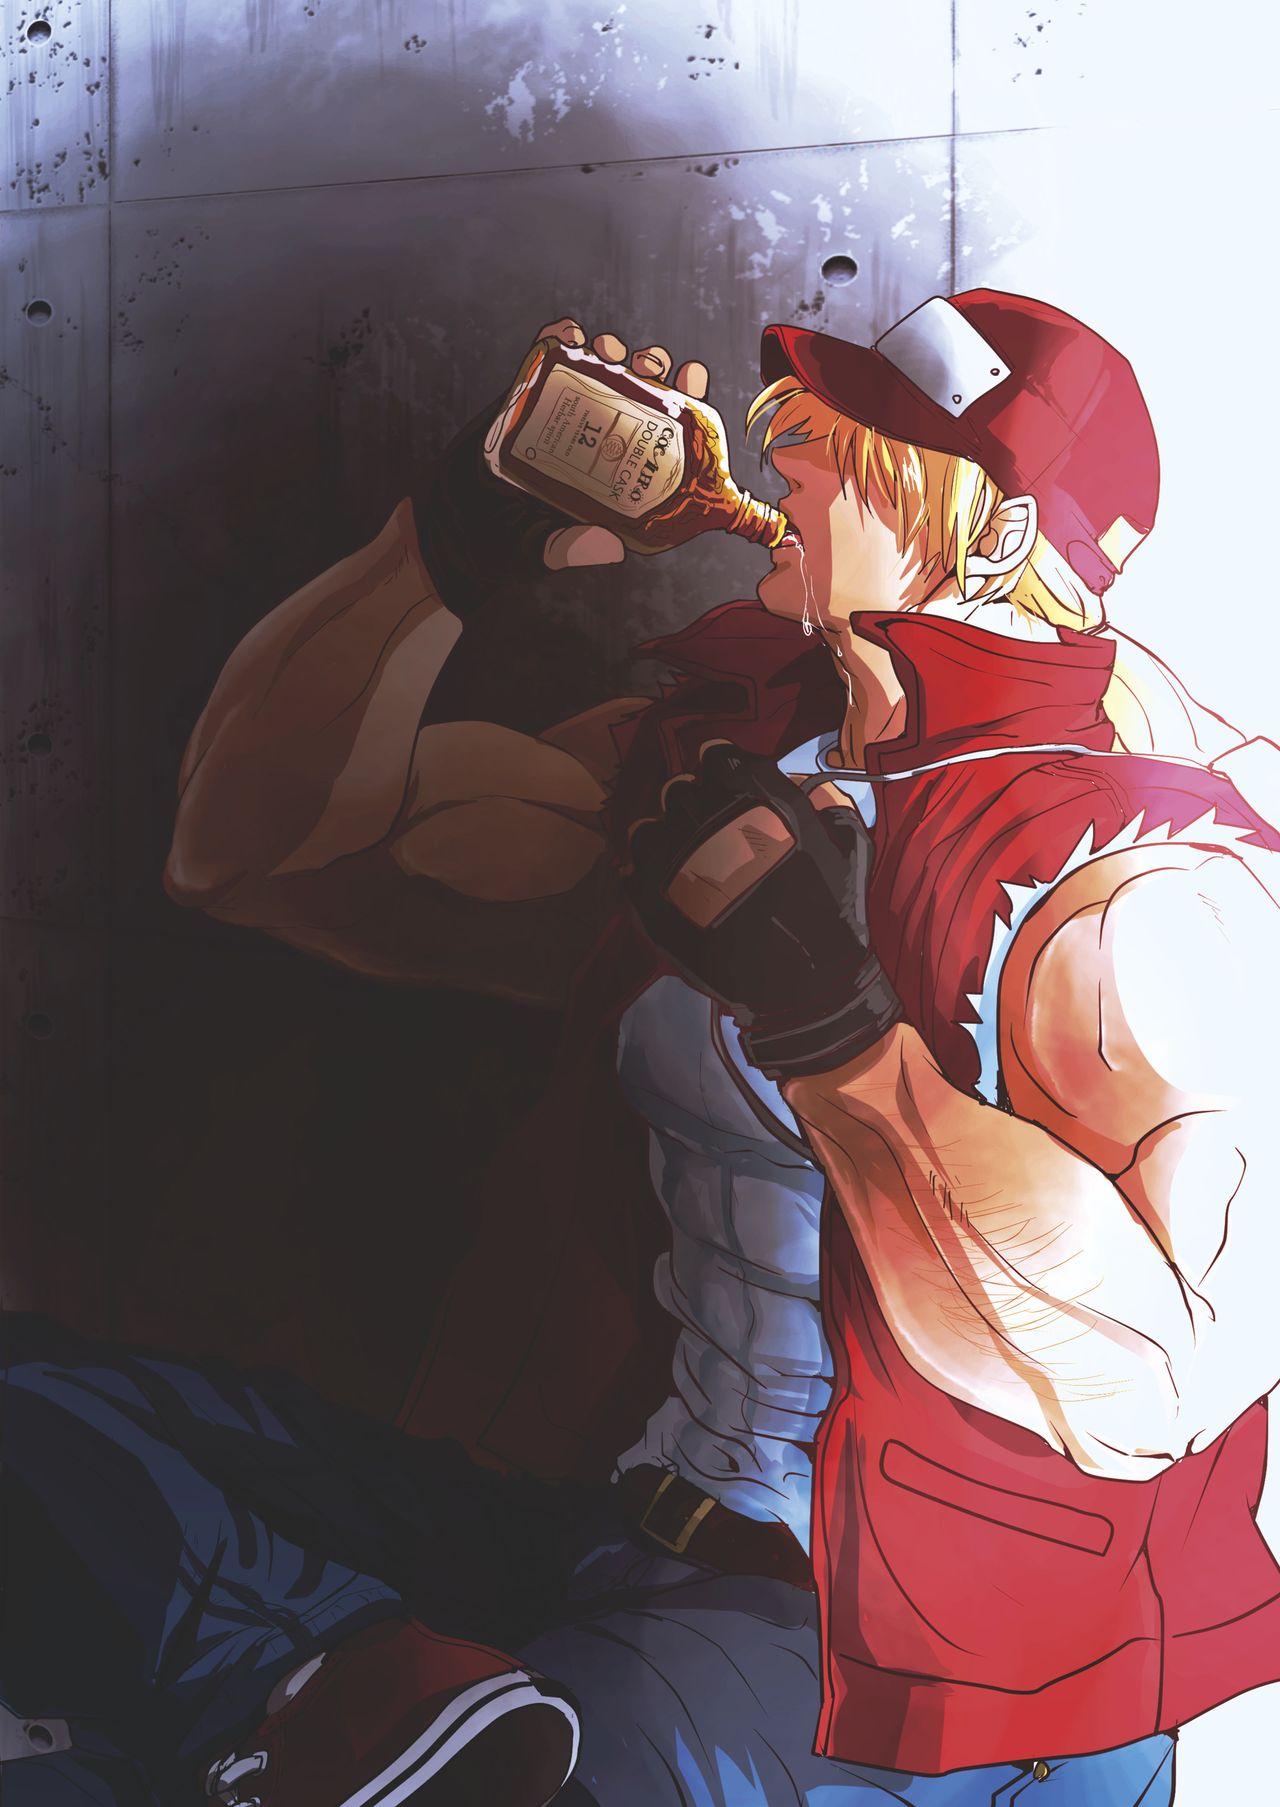 Story SLOW DOWN - King of fighters Fatal fury Dykes - Picture 3